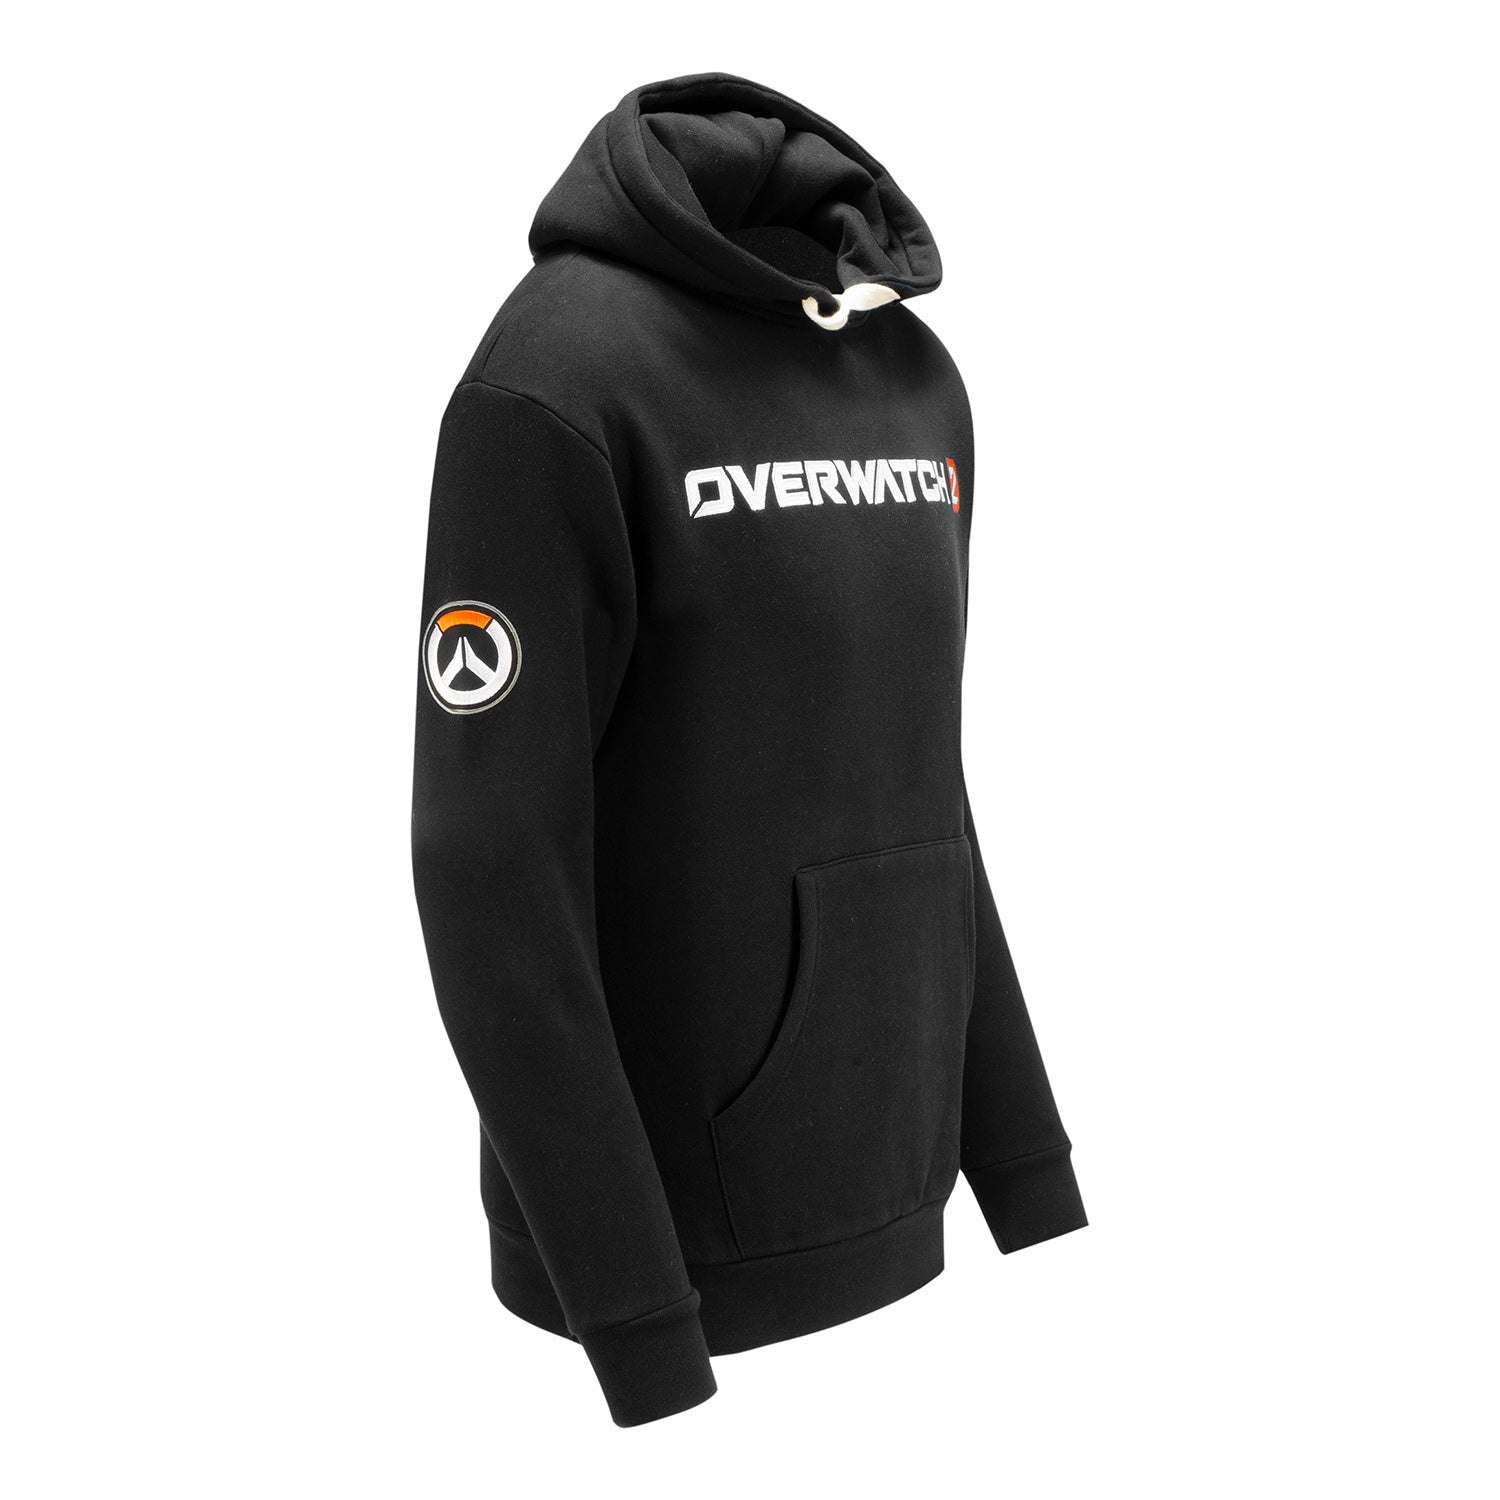 Overwatch 2 Heavy Weight Patch Pullover Black Hoodie - Side View with Overwatch Logo on Sleeve